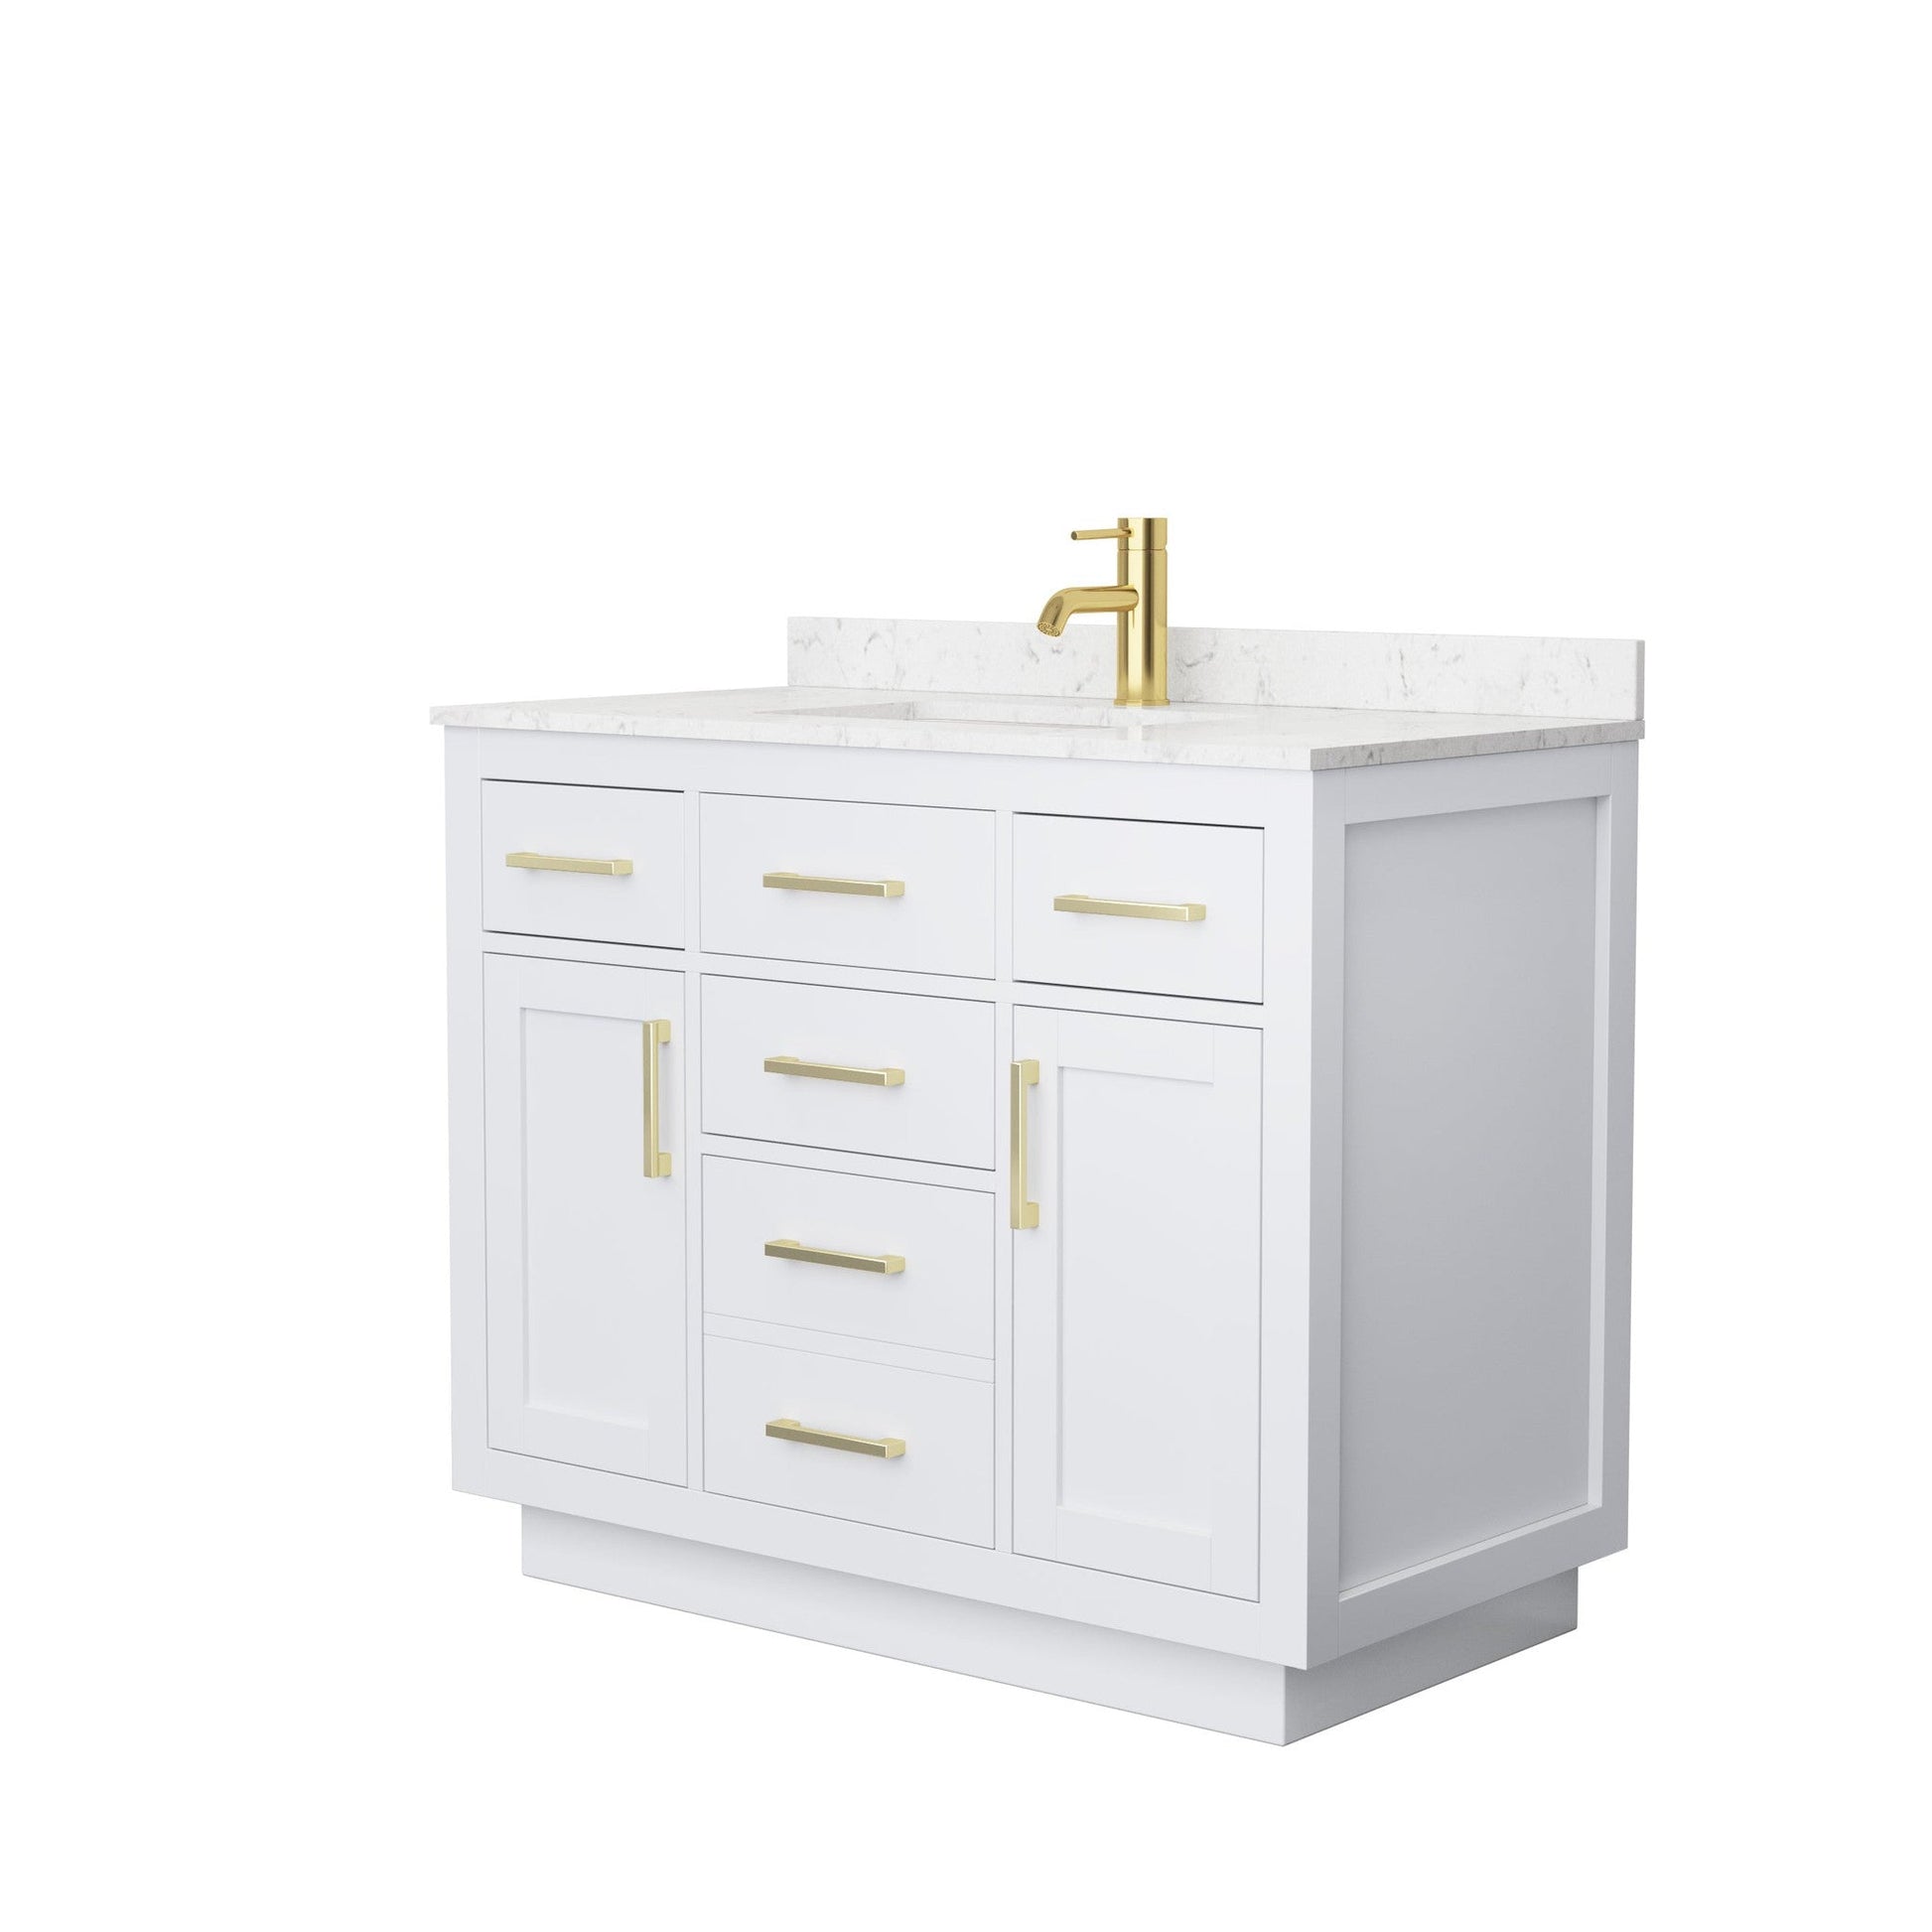 Beckett 42" Single Bathroom Vanity With Toe Kick in White, Carrara Cultured Marble Countertop, Undermount Square Sink, Brushed Gold Trim